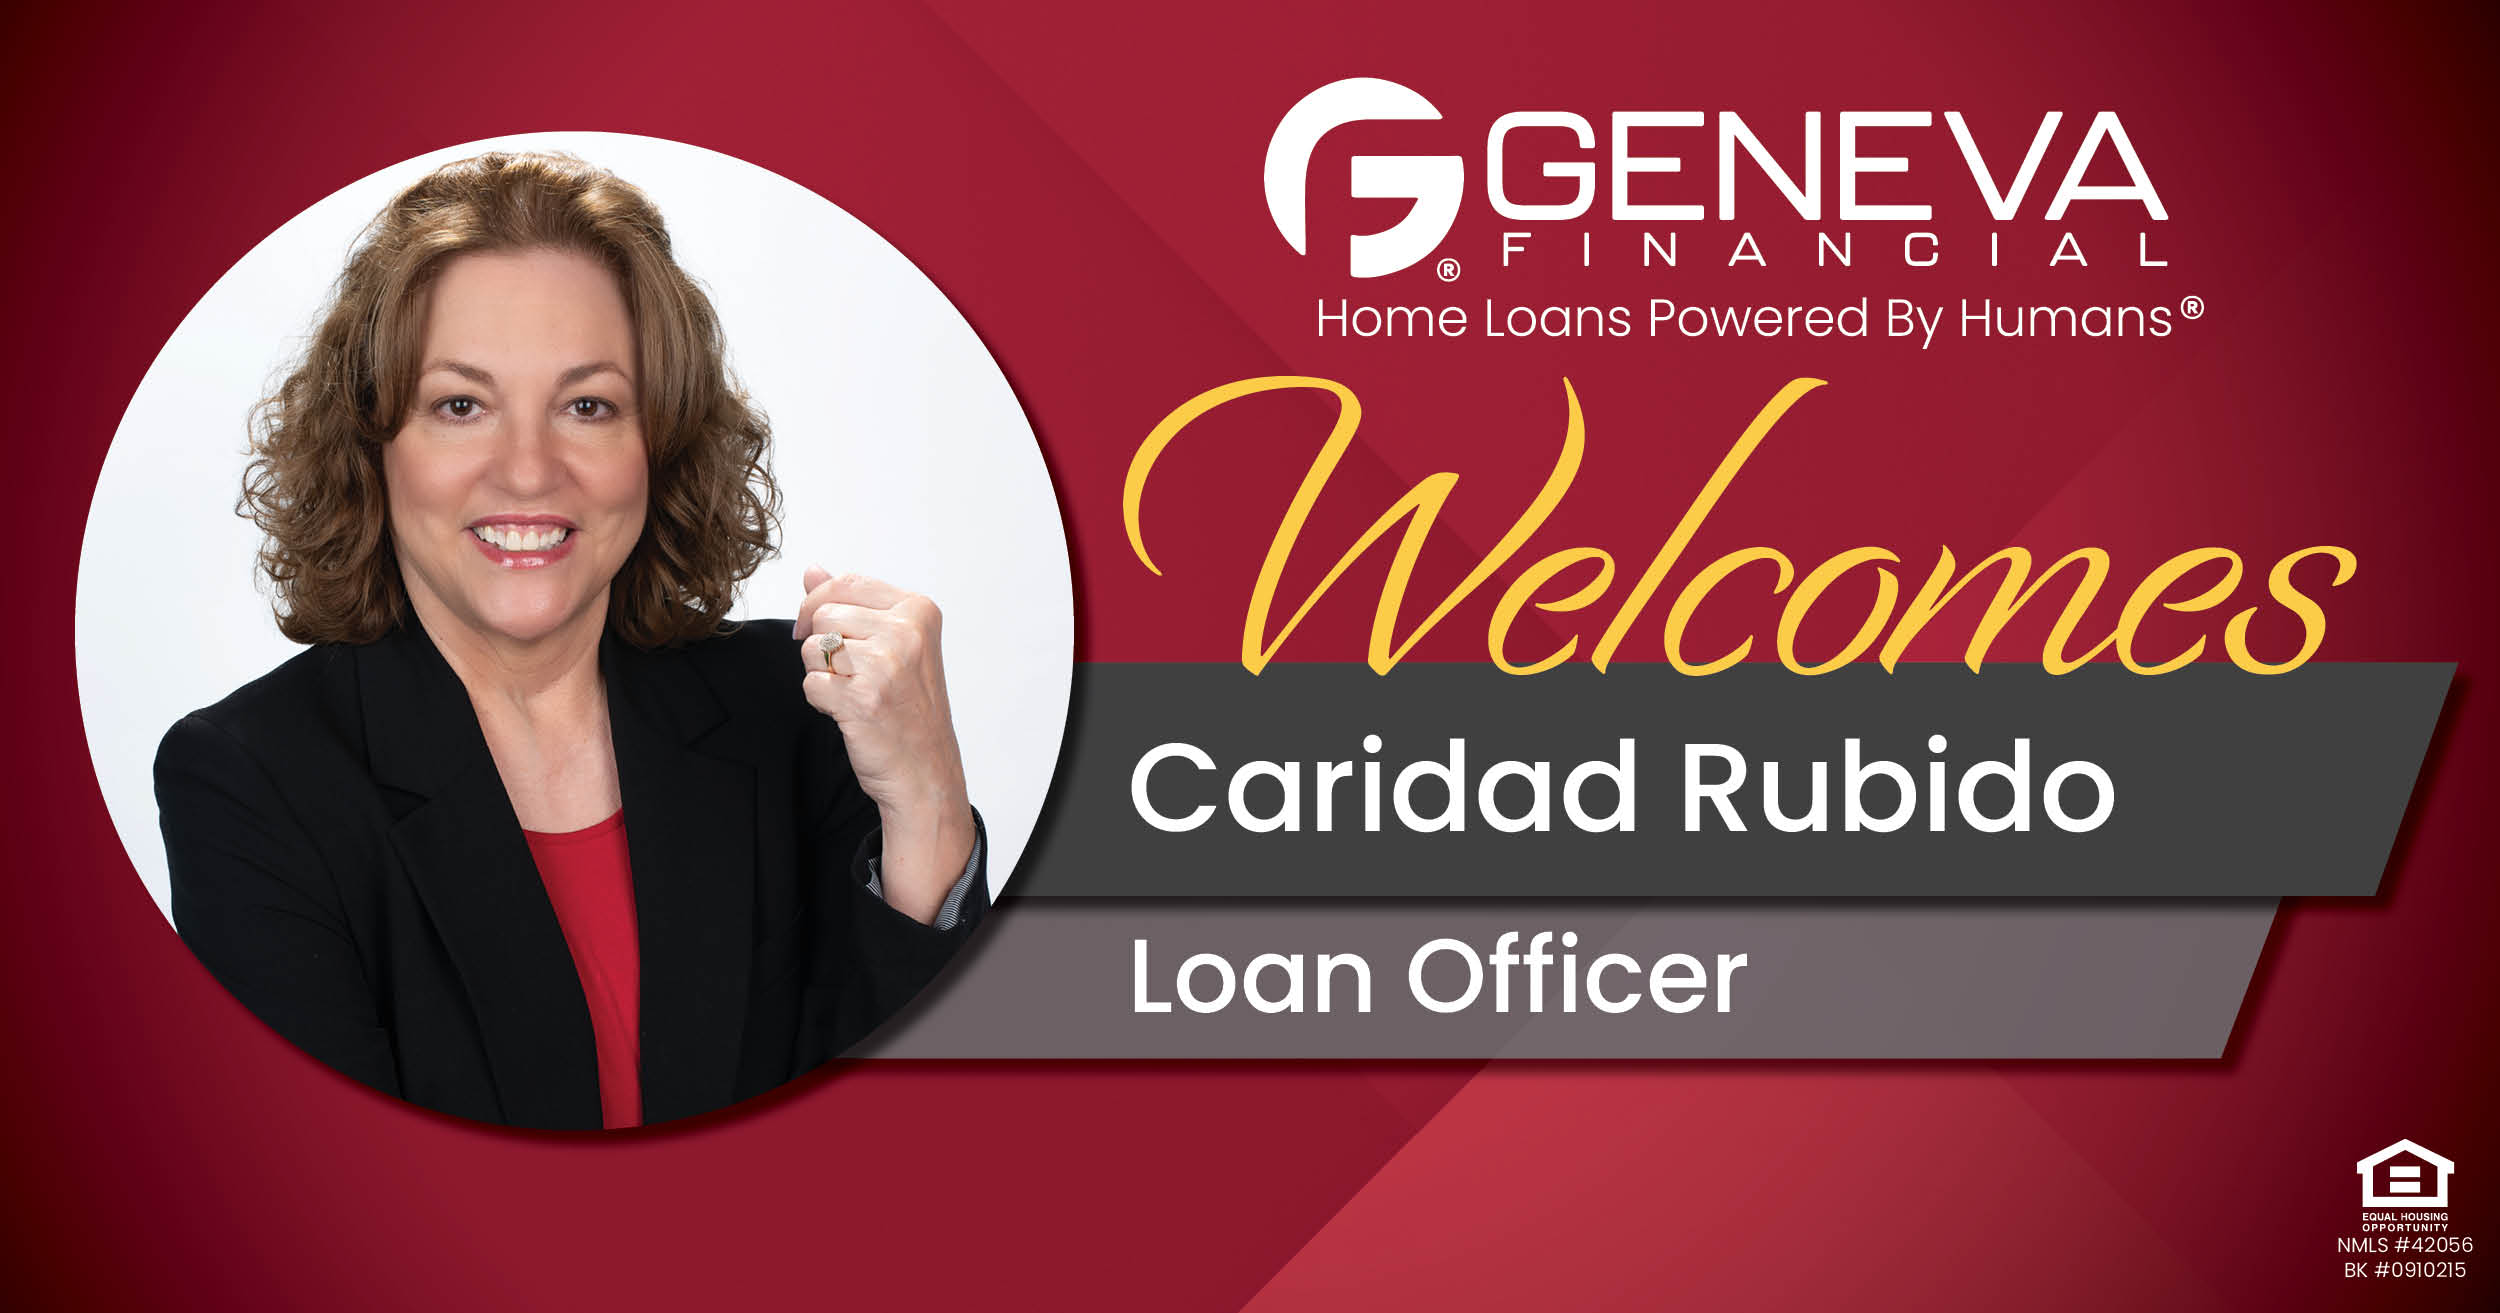 Geneva Financial Welcomes New Loan Officer Caridad Rubido to Miami, FL – Home Loans Powered by Humans®.